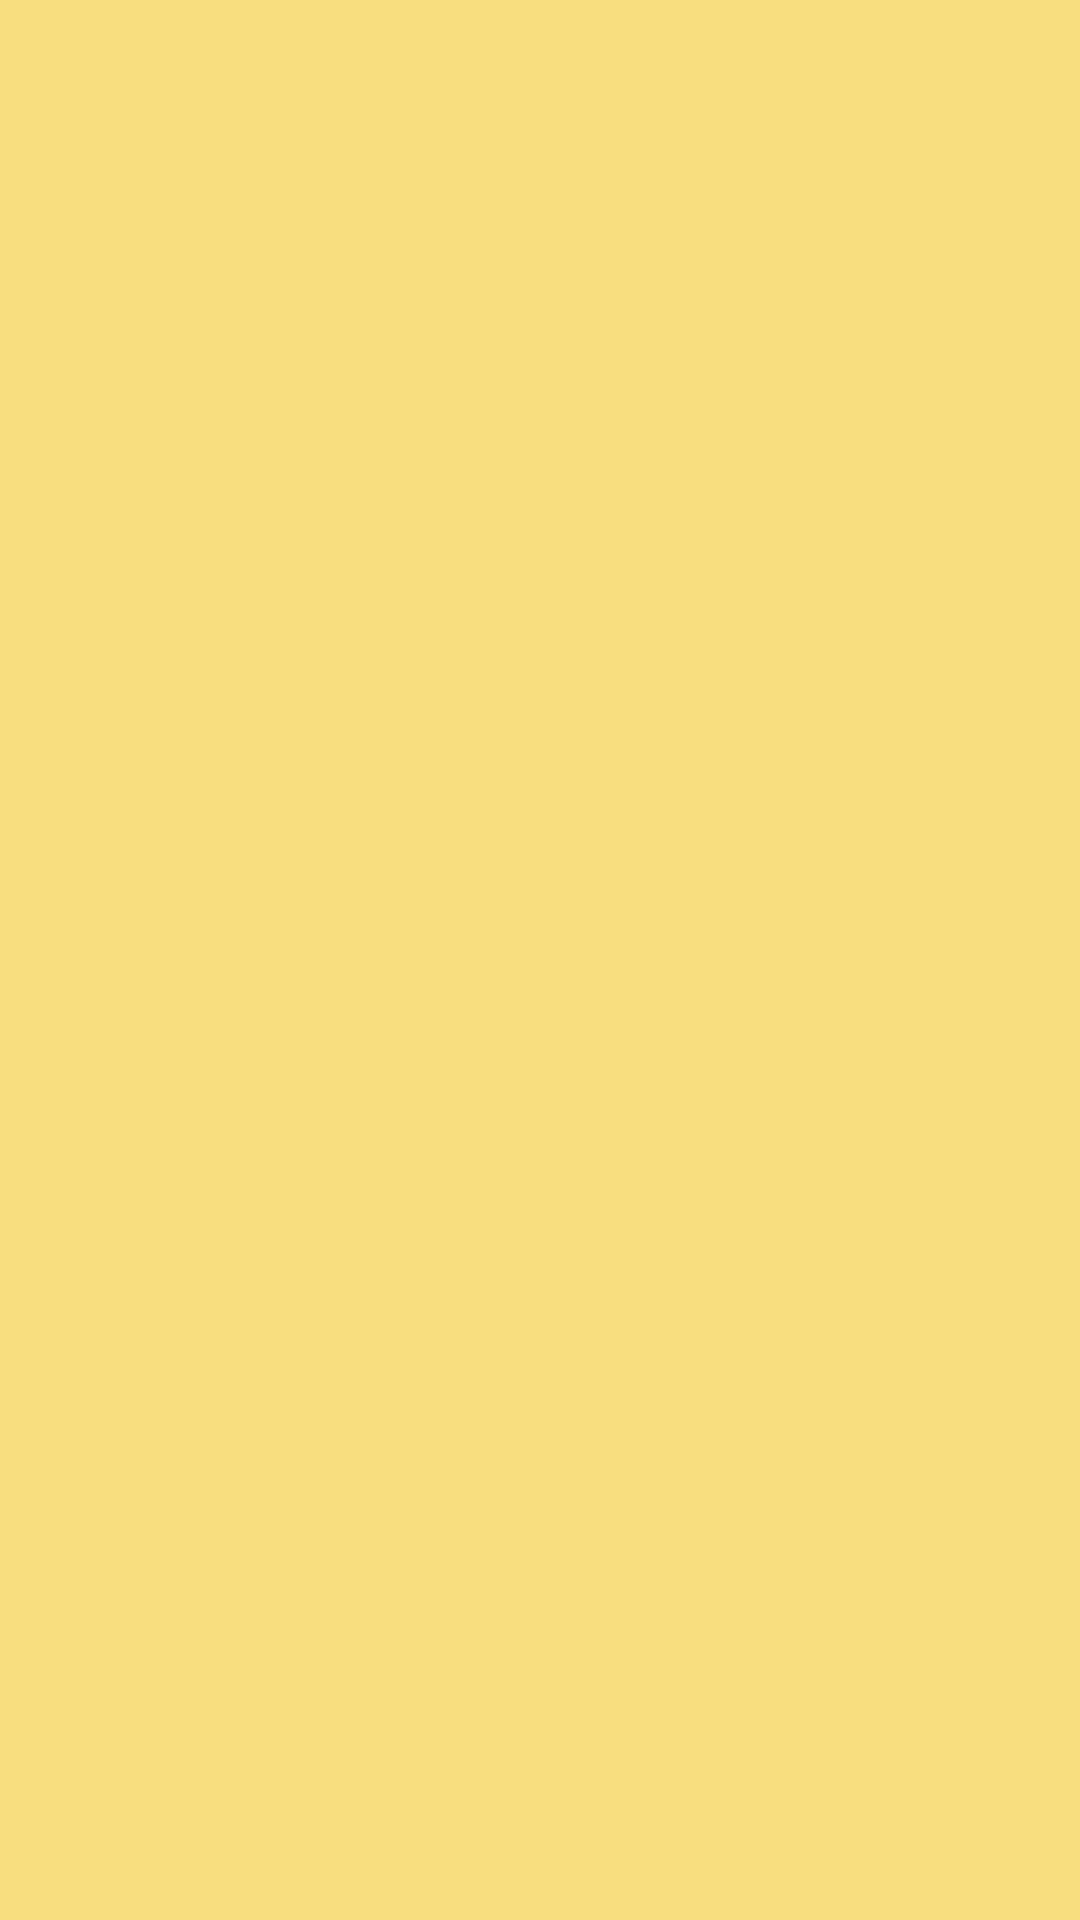 1080x1920 Mellow Yellow Solid Color Background